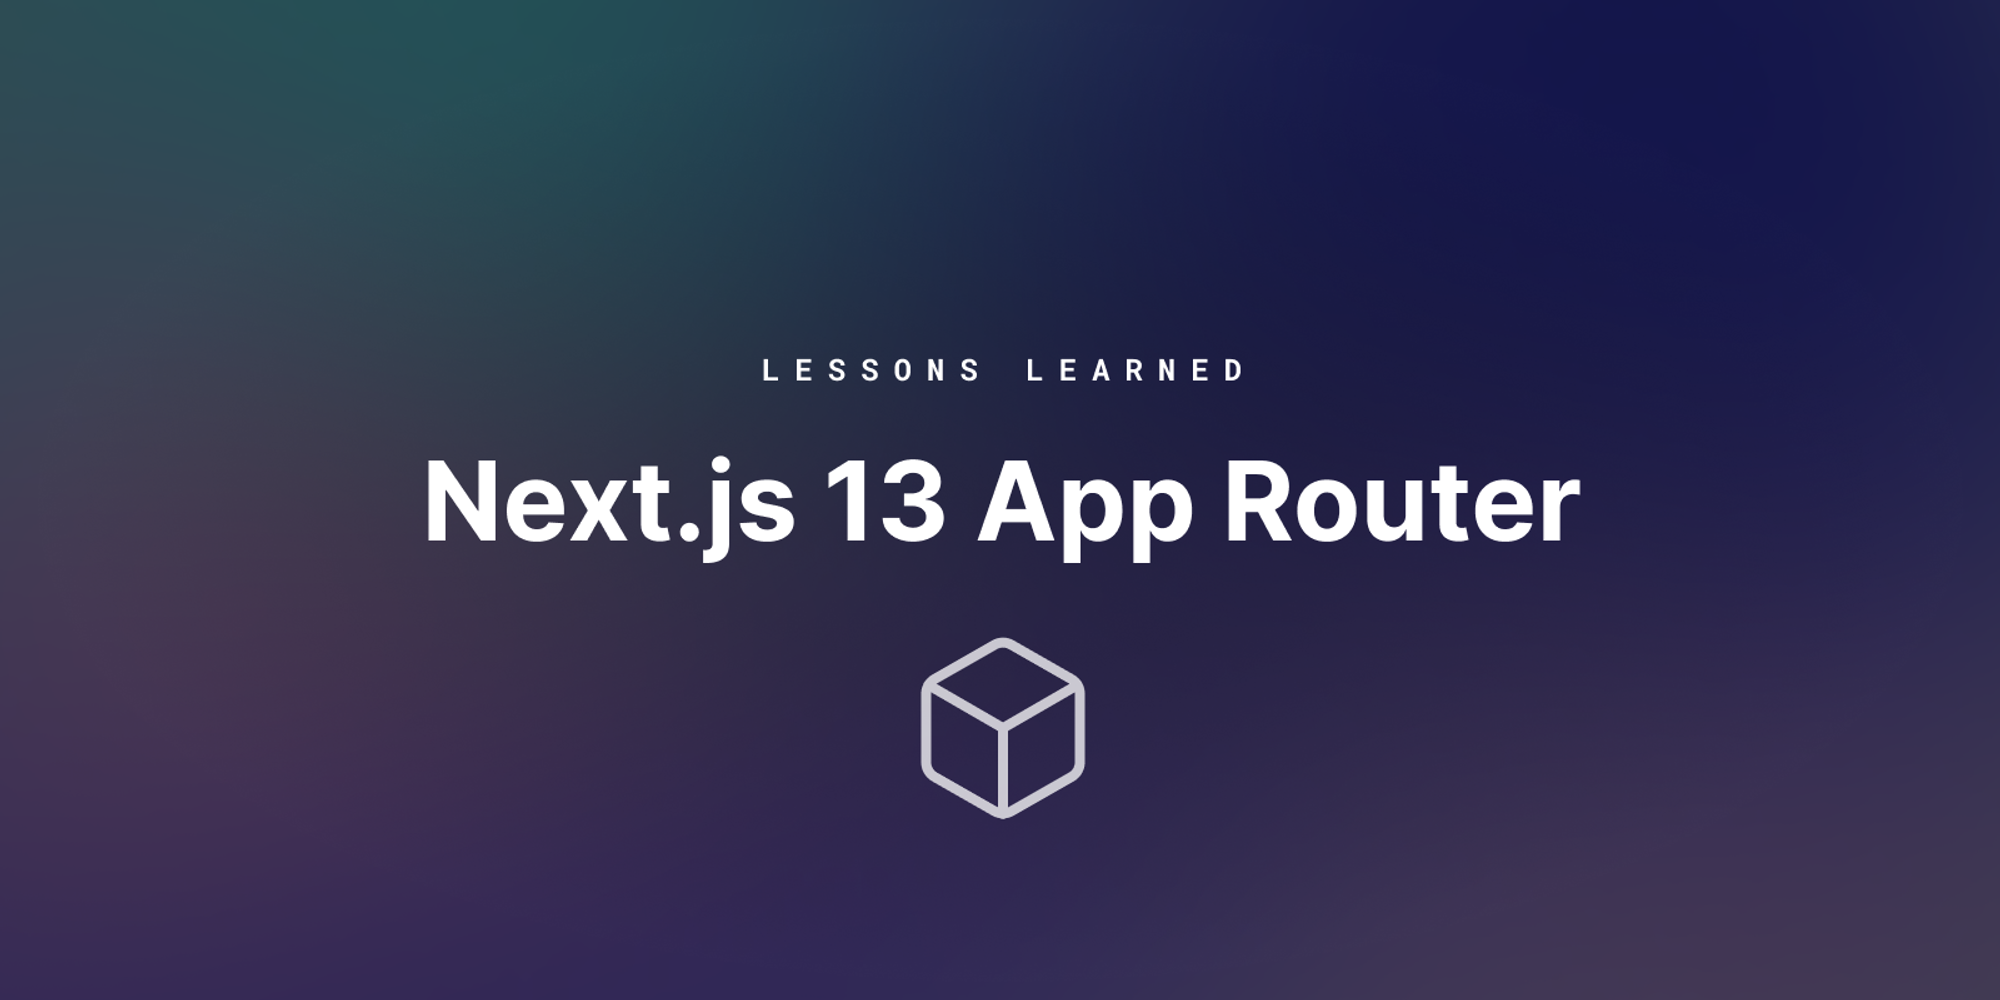 5 Lessons Learned From Taking Next.js App Router to Production - Inngest Blog